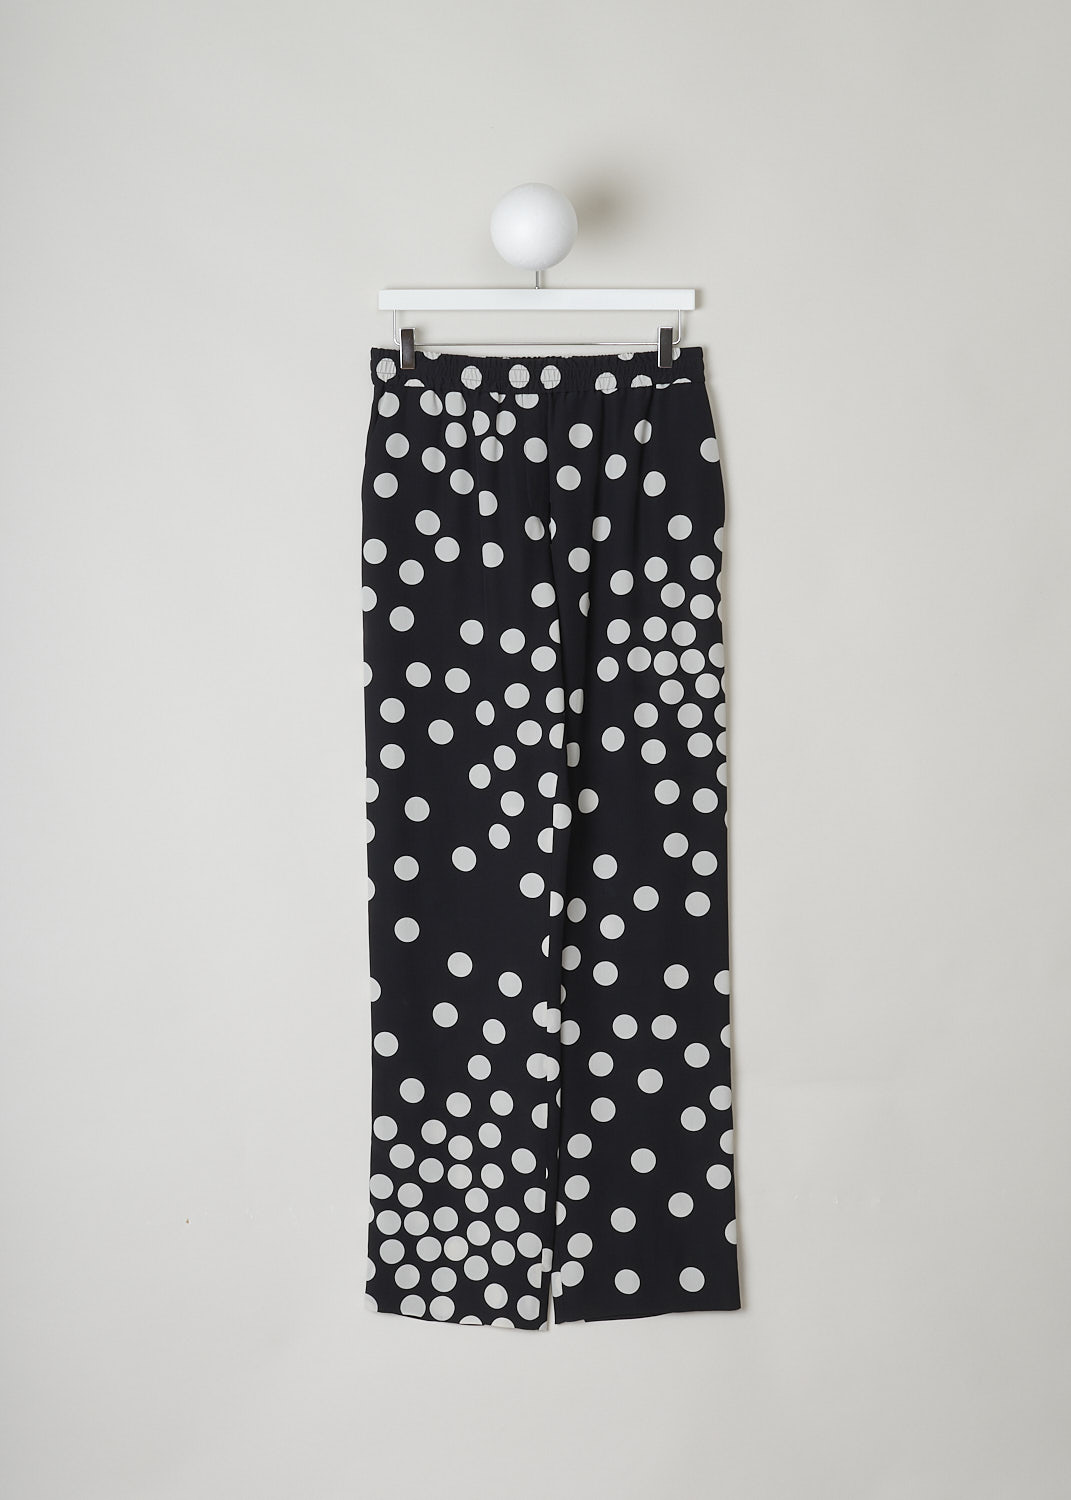 VALENTINO, HIGH WAISTED BLACK PANTS WITH WHITE DOTS, VB3RB43565N_0NA, Black, White, Print, Front, These high waisted black silk pants have an irregular doted print in white. These slip-on pants have an elasticated waistline with a drawstring on the inside. The straight, ankle length pant legs have white piping along side seams. In the front, these pants have slanted pockets and in the back welt pockets can be found.
